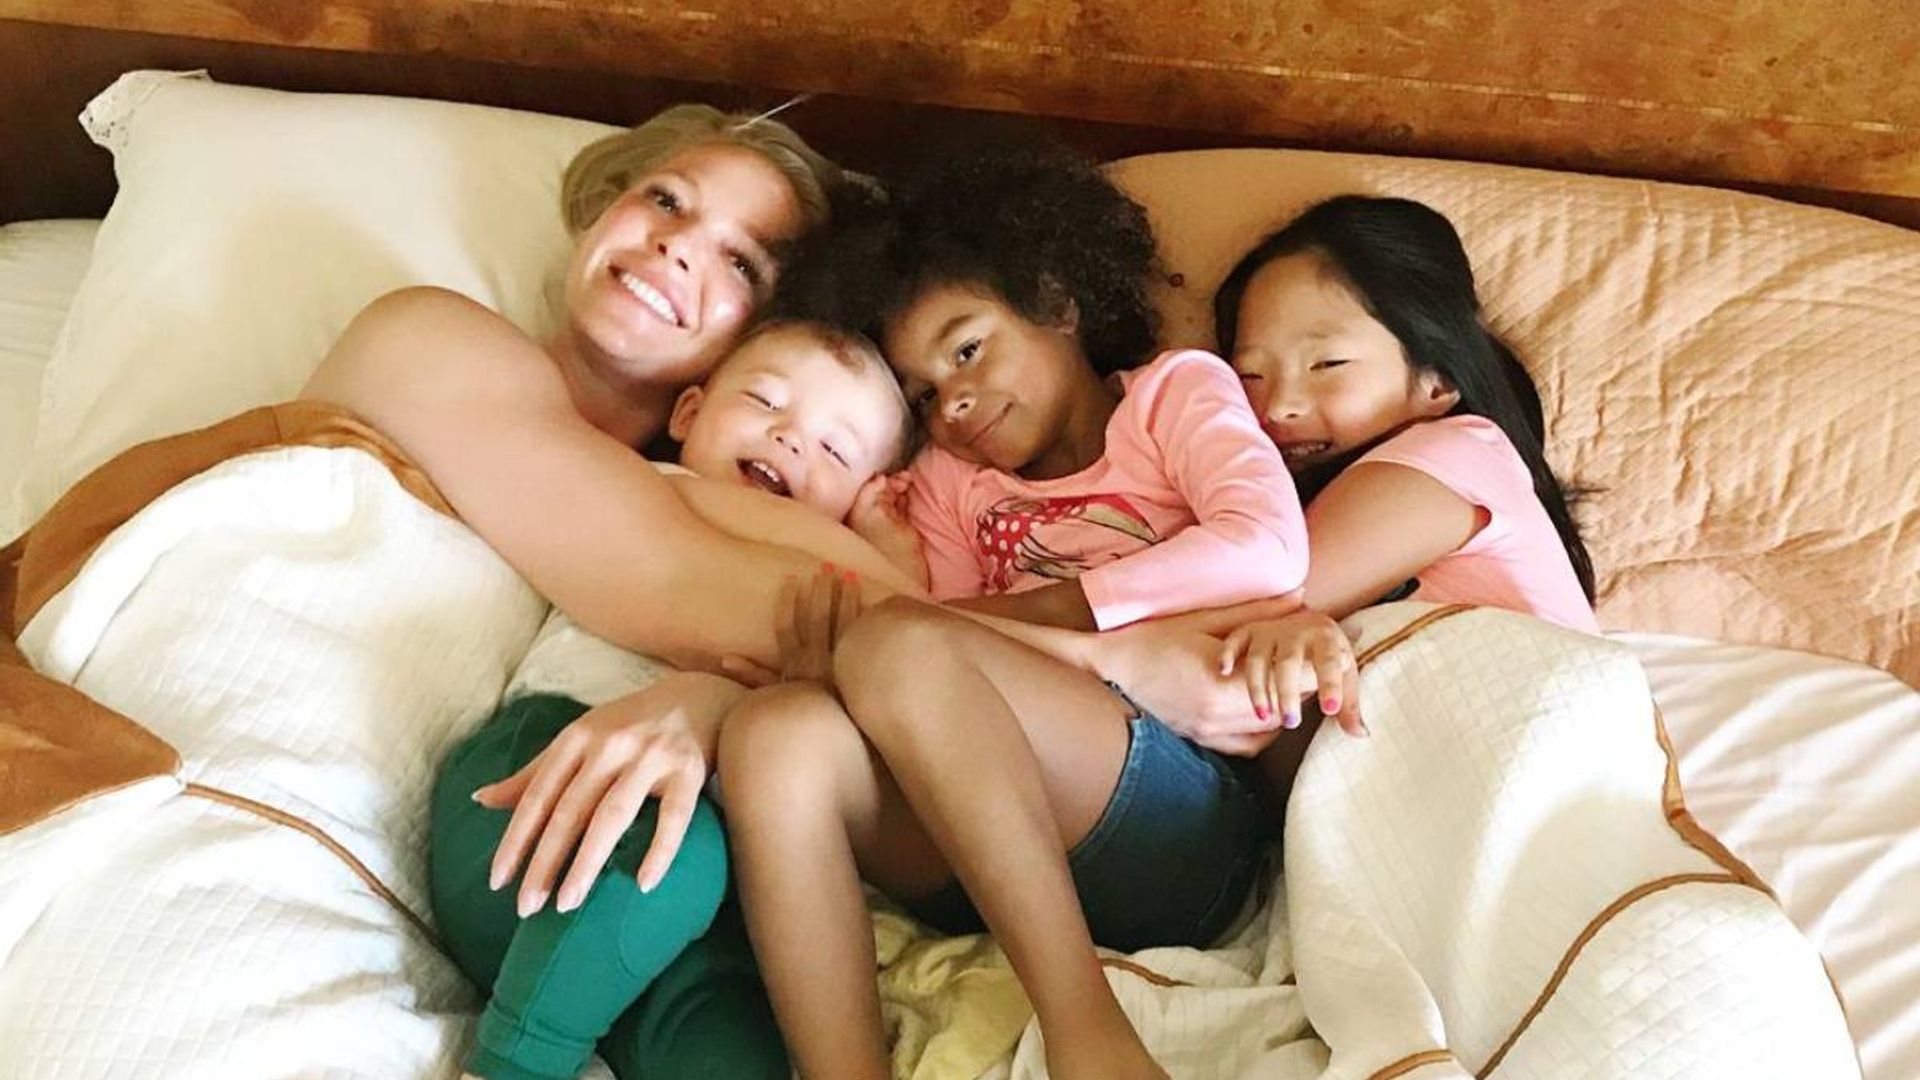 Firefly Lanes Katherine Heigl shares glimpse inside home life with children 